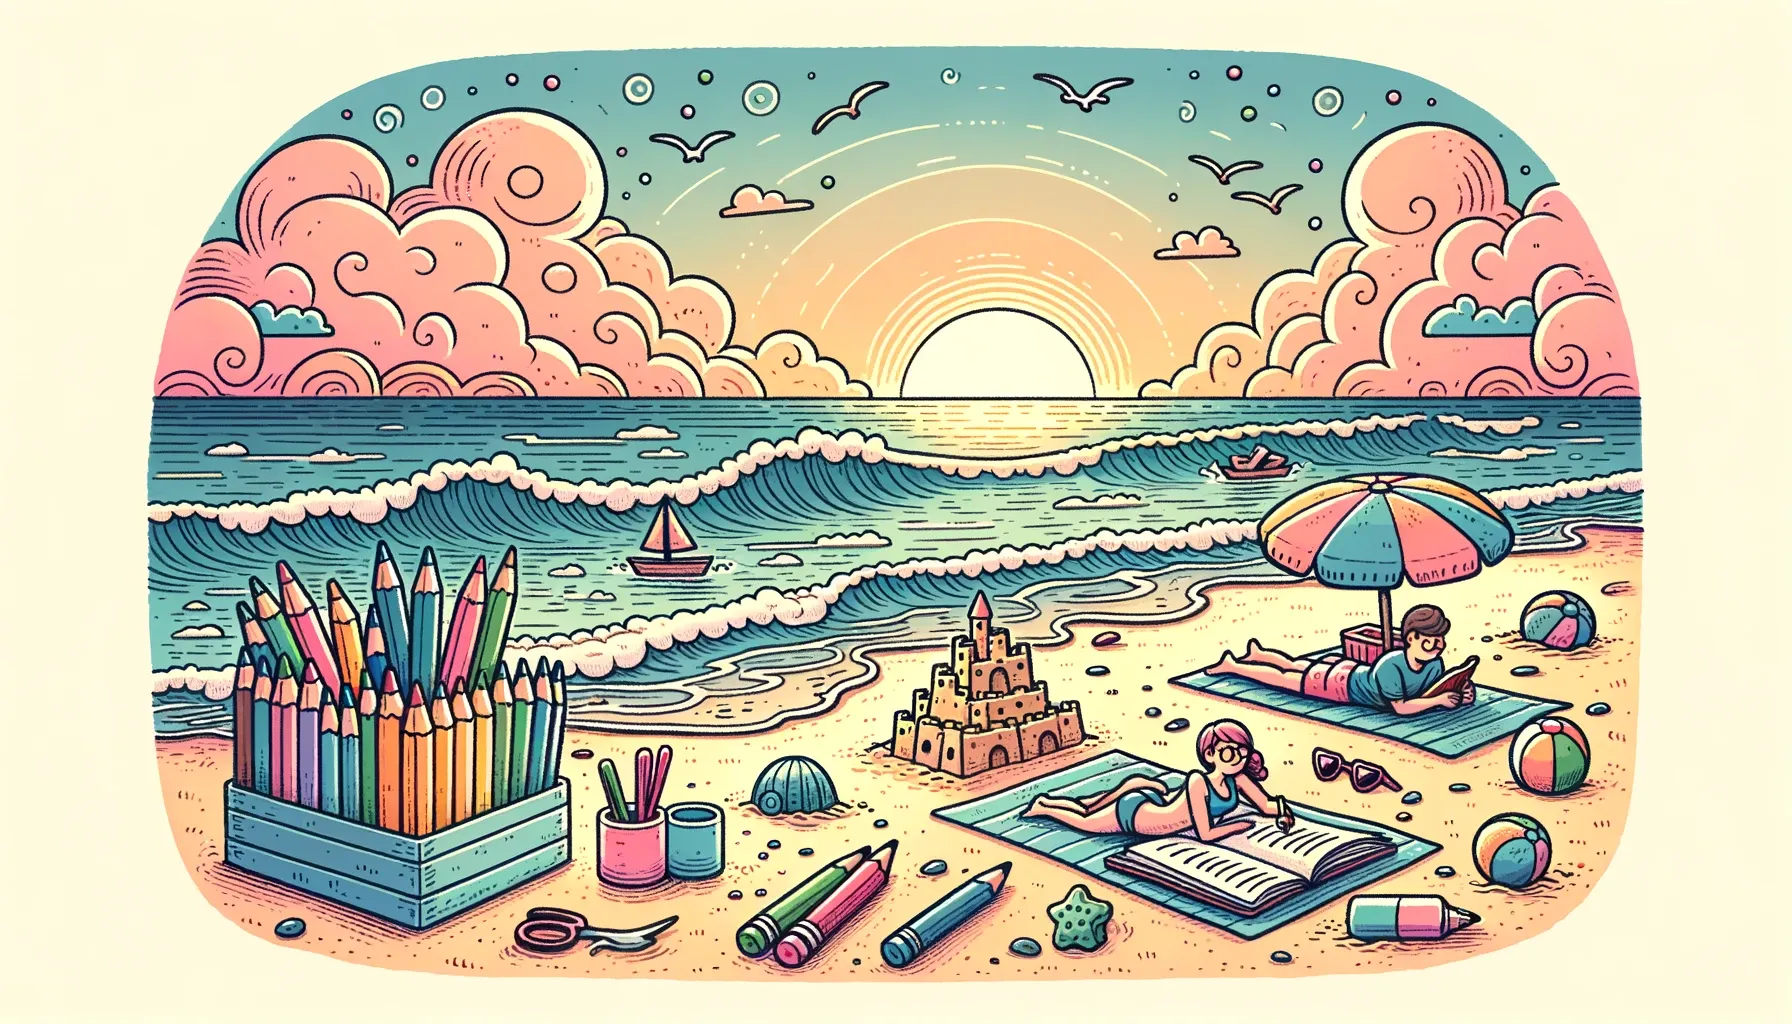 Wide cartoon doodle of a quiet beach setting during sunset. Adults with coloring books lounge on beach towels, while colored pencils playfully build sandcastles. The sound of waves and the pastel-hued sky create a soothing backdrop.